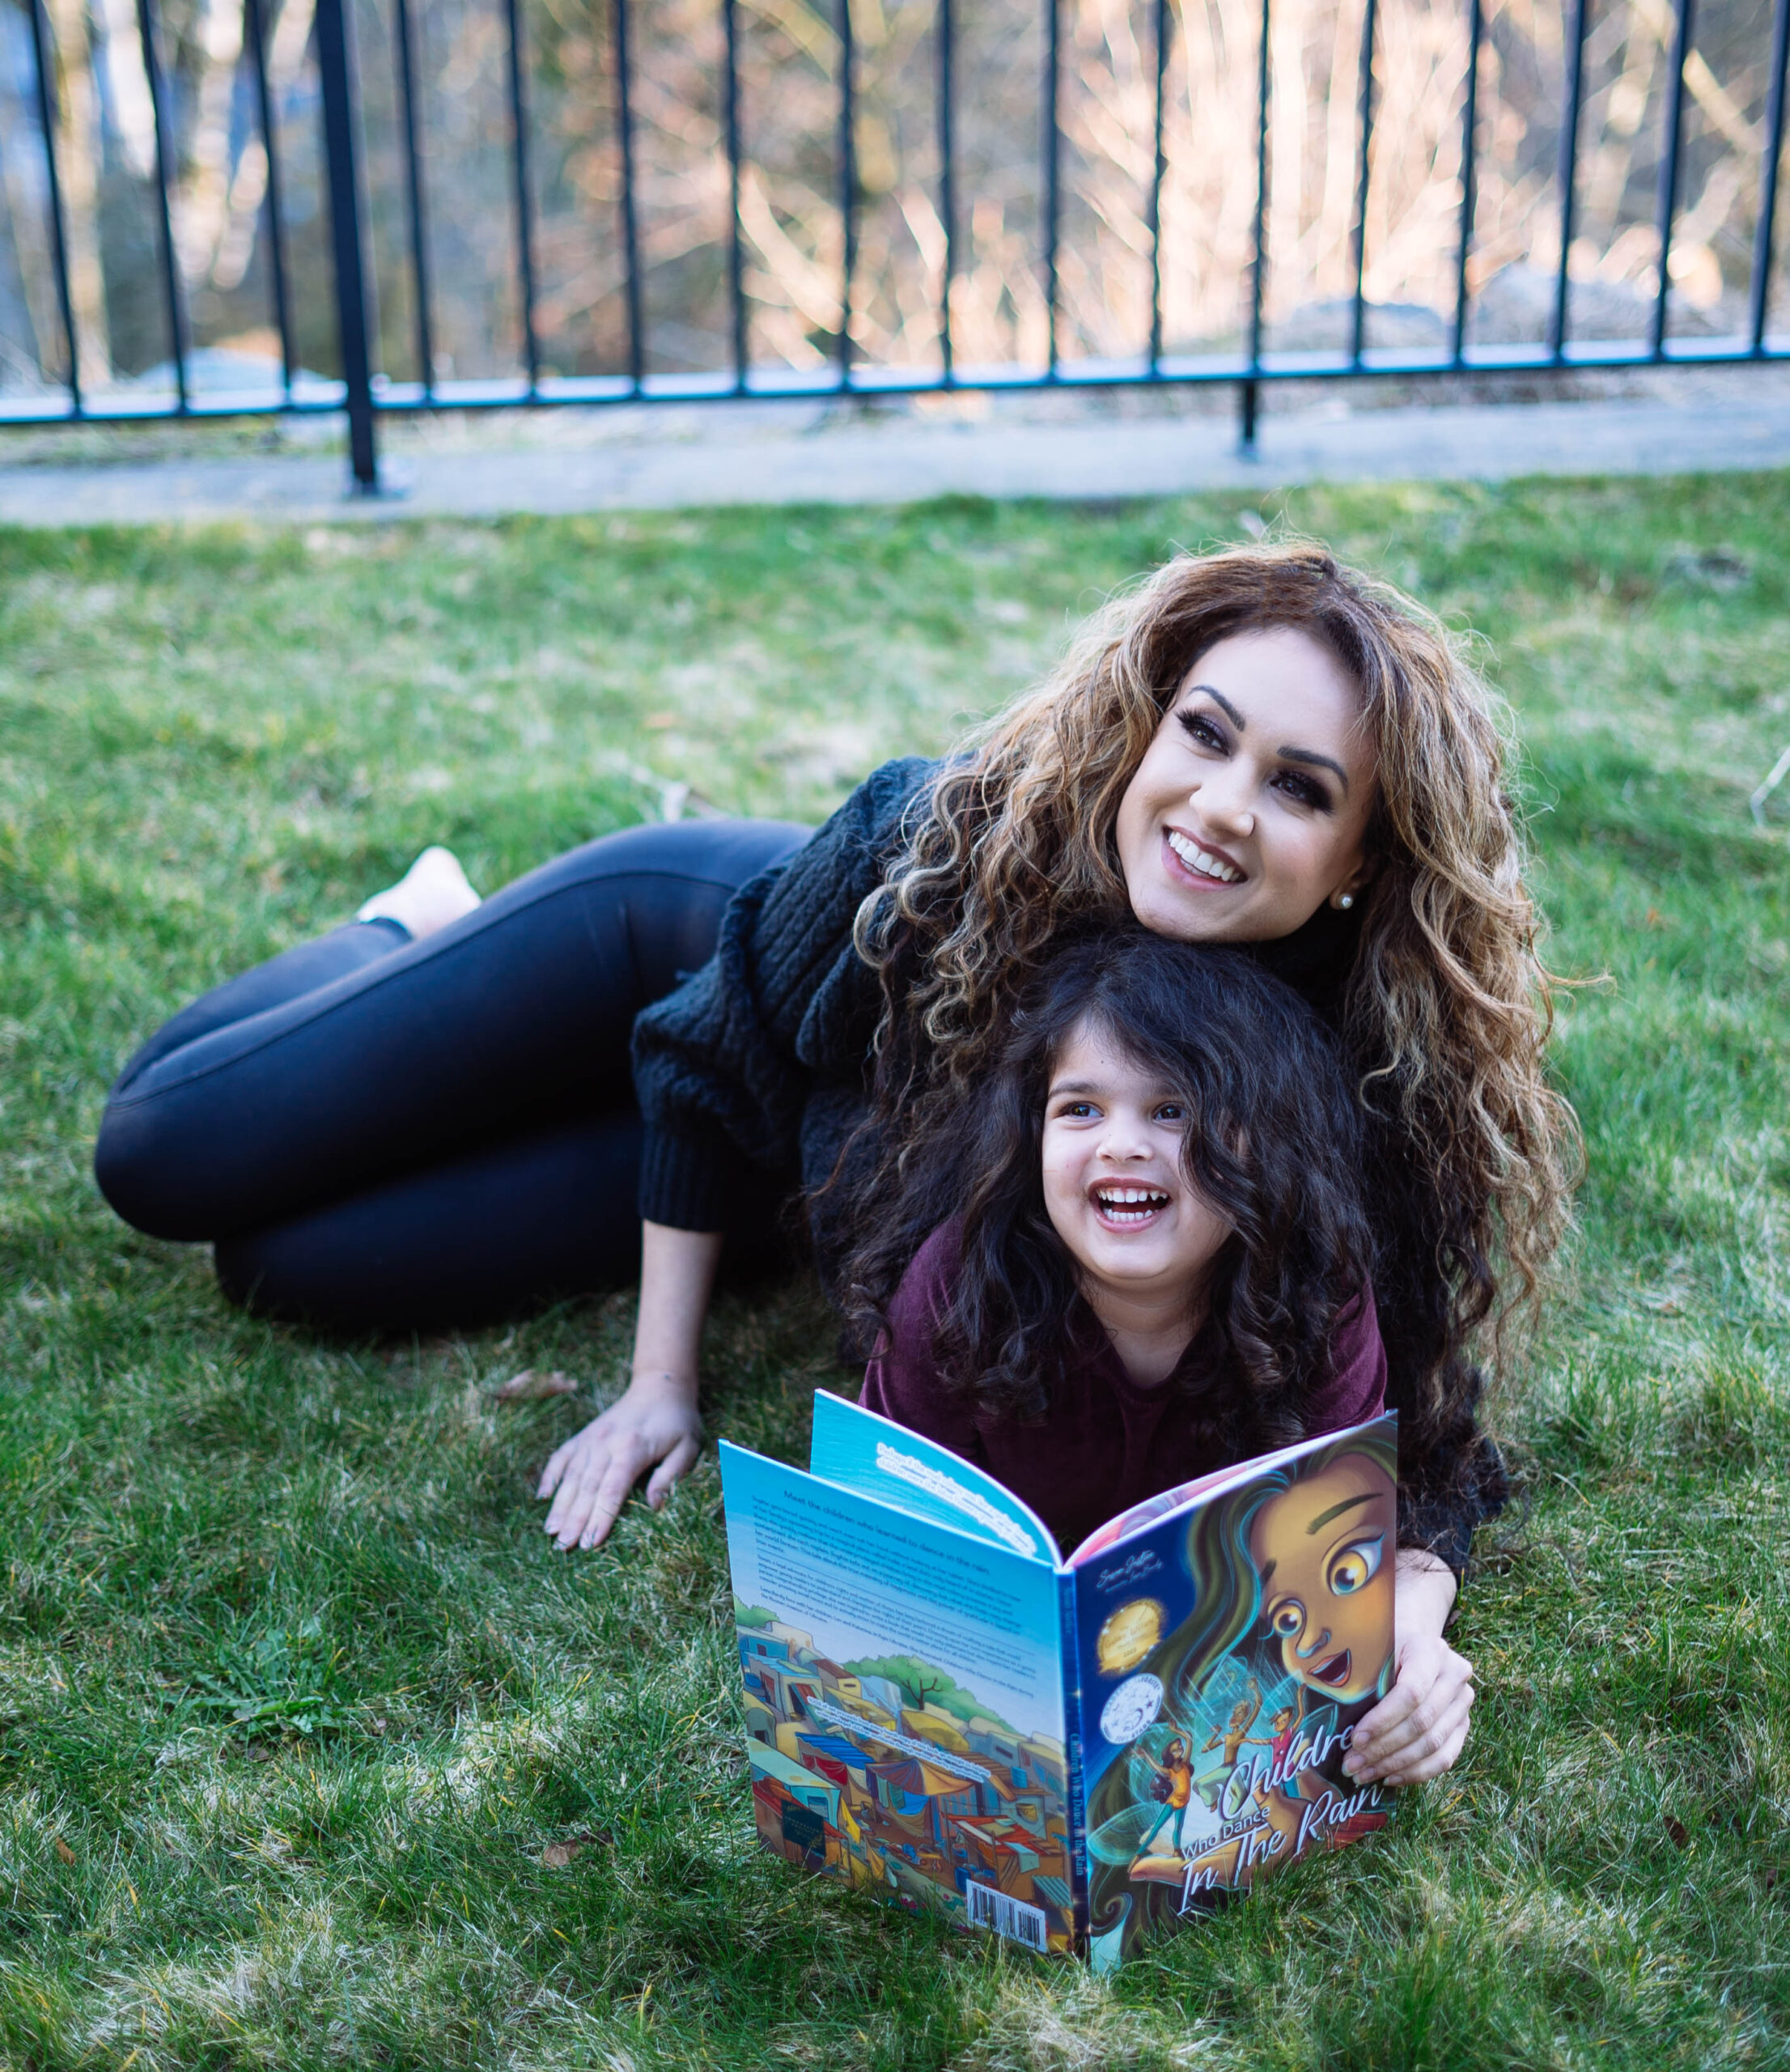 Susan Justice and child reading a the Children in the Rain book on a grass lawn with wide smiles.